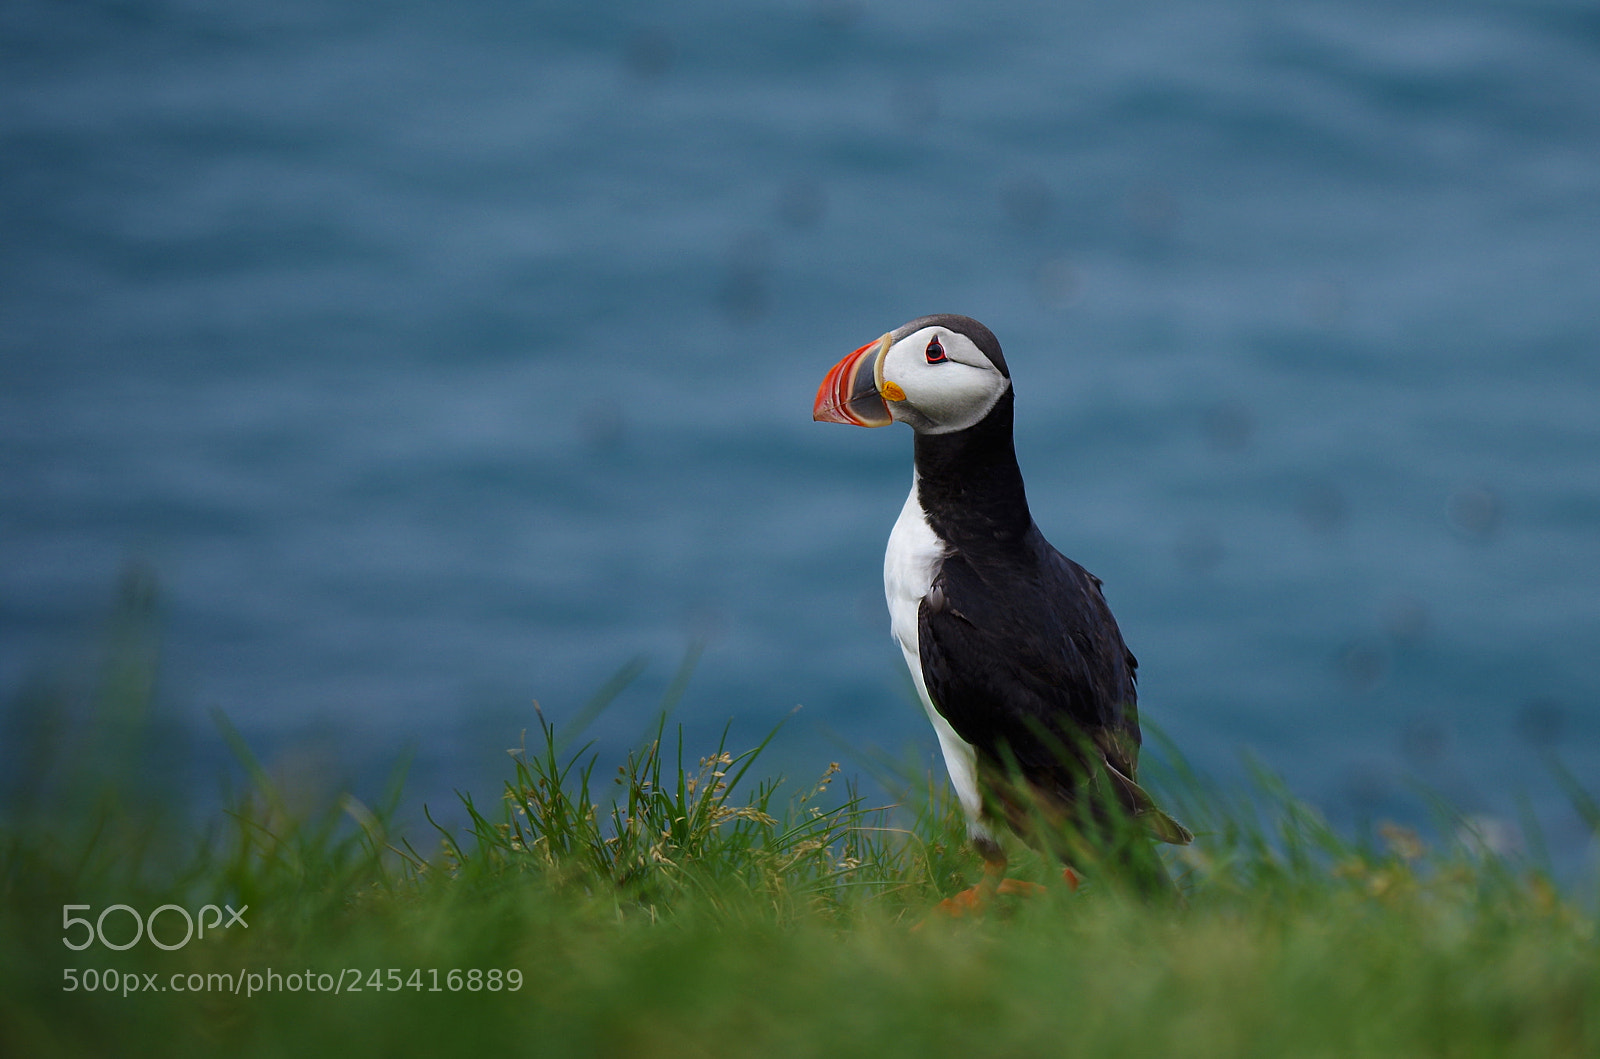 Pentax K-500 sample photo. Atlantic puffin on the photography